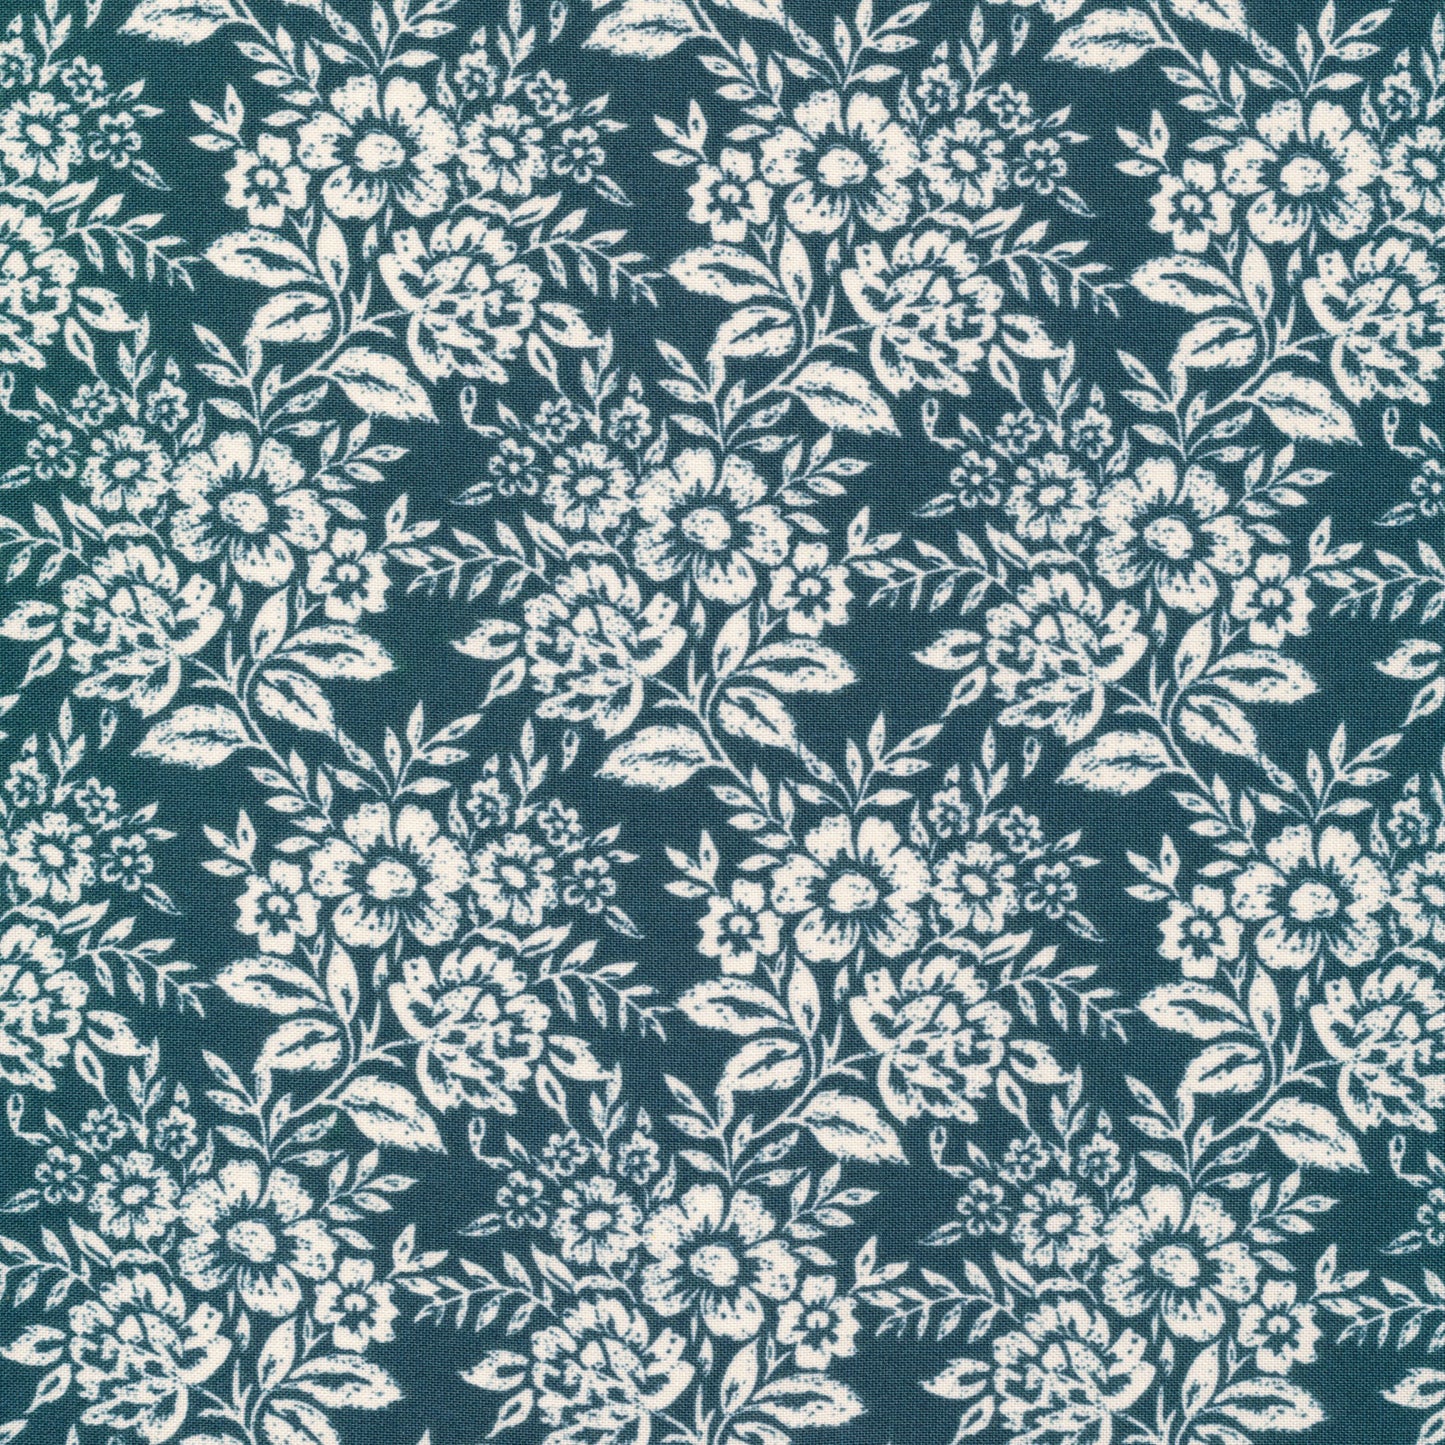 Lovely Lace on Deep Teal | Organic - Weave & Woven